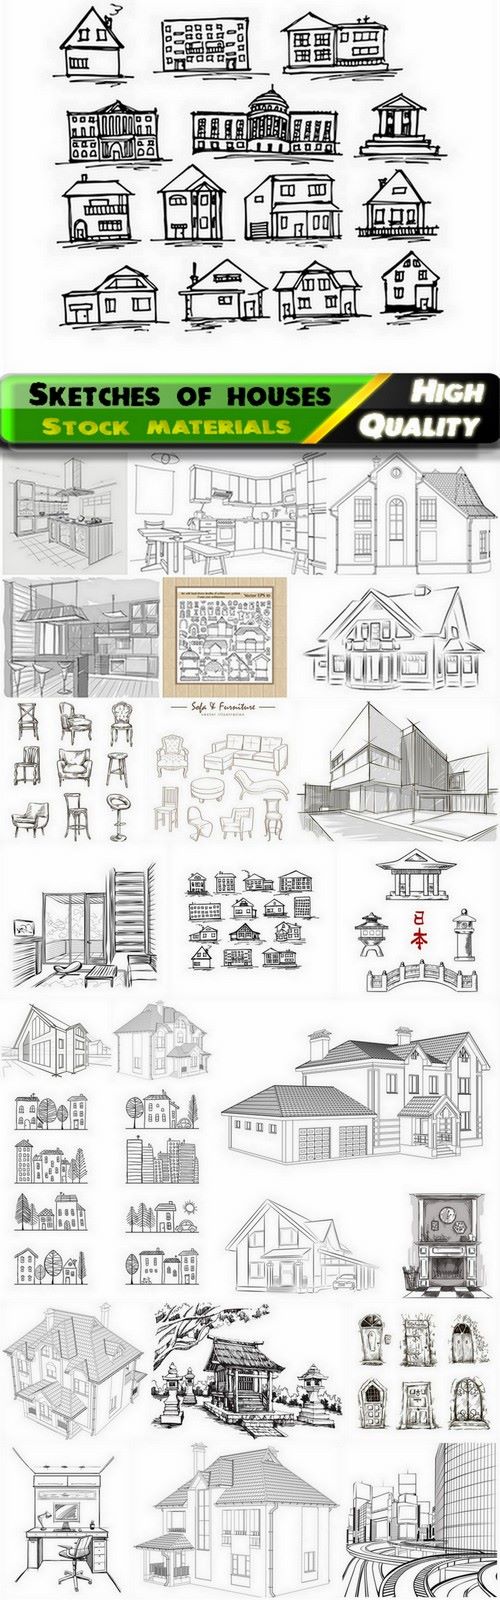 Sketches and drawings of houses and buildings - 25 Eps